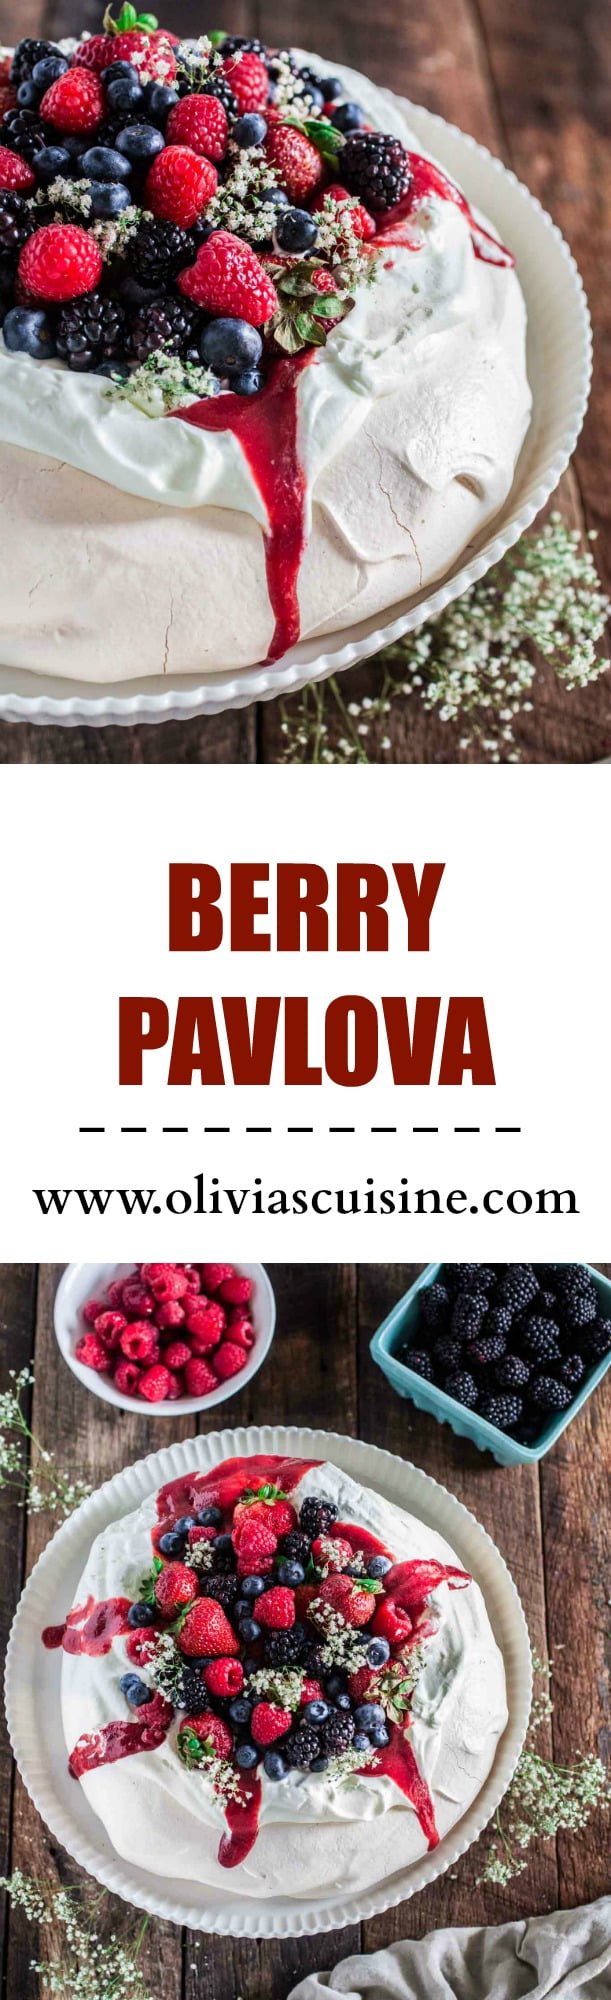 Berry Pavlova | www.oliviascuisine.com | A delicious meringue-based dessert named after the Russian ballerina Anna Pavlova. Easy to make and always a crowd pleaser!